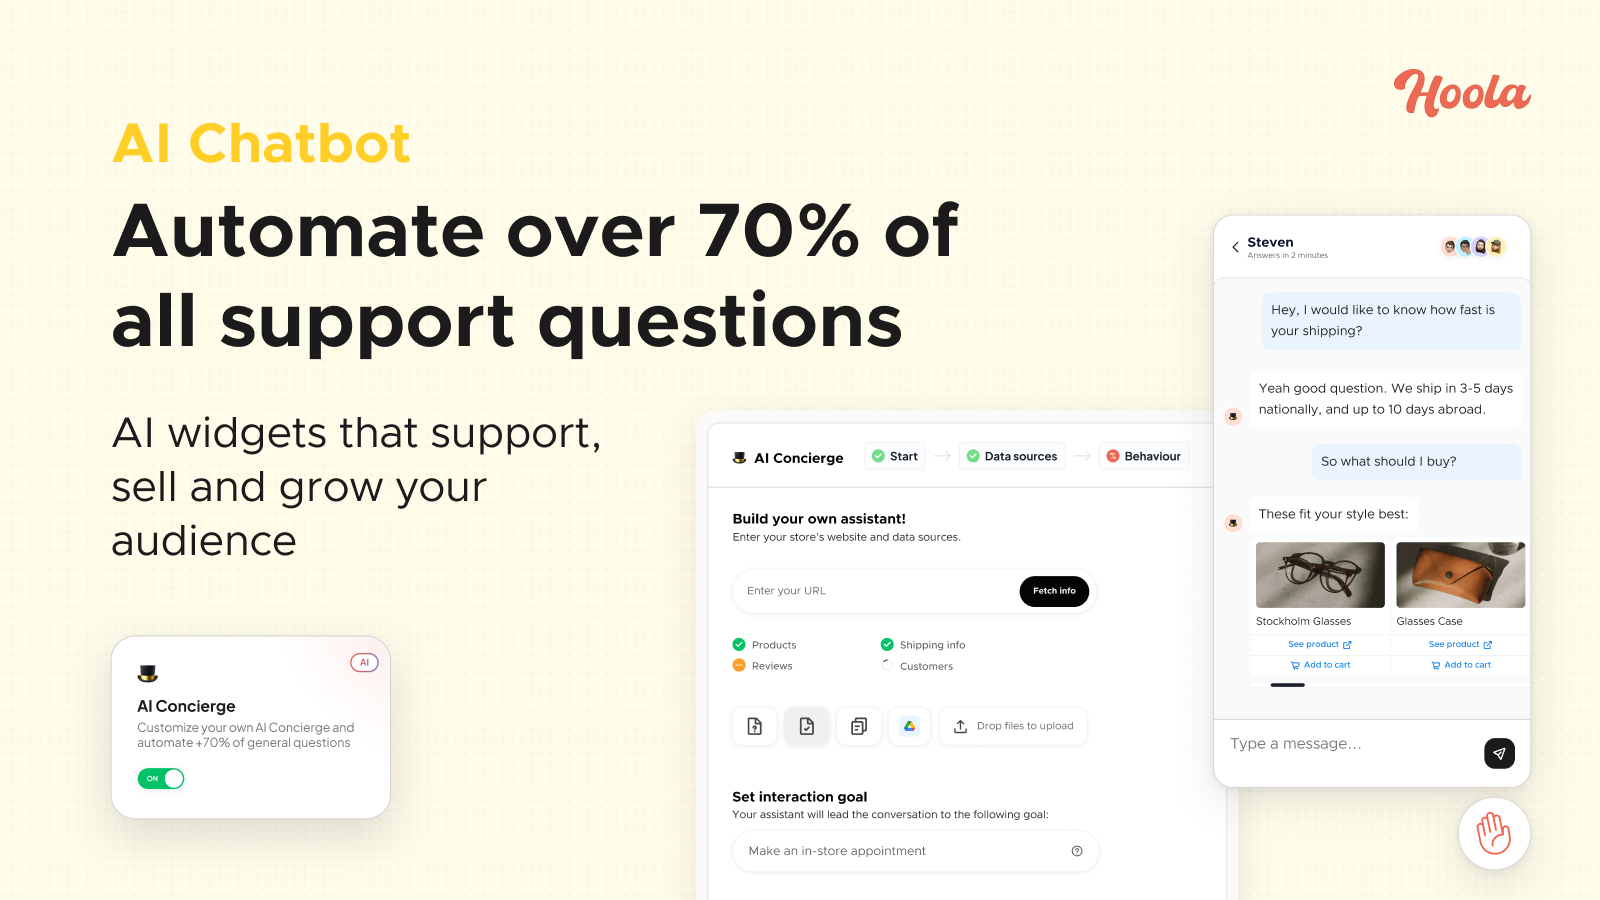 Automate over 70% of ai support